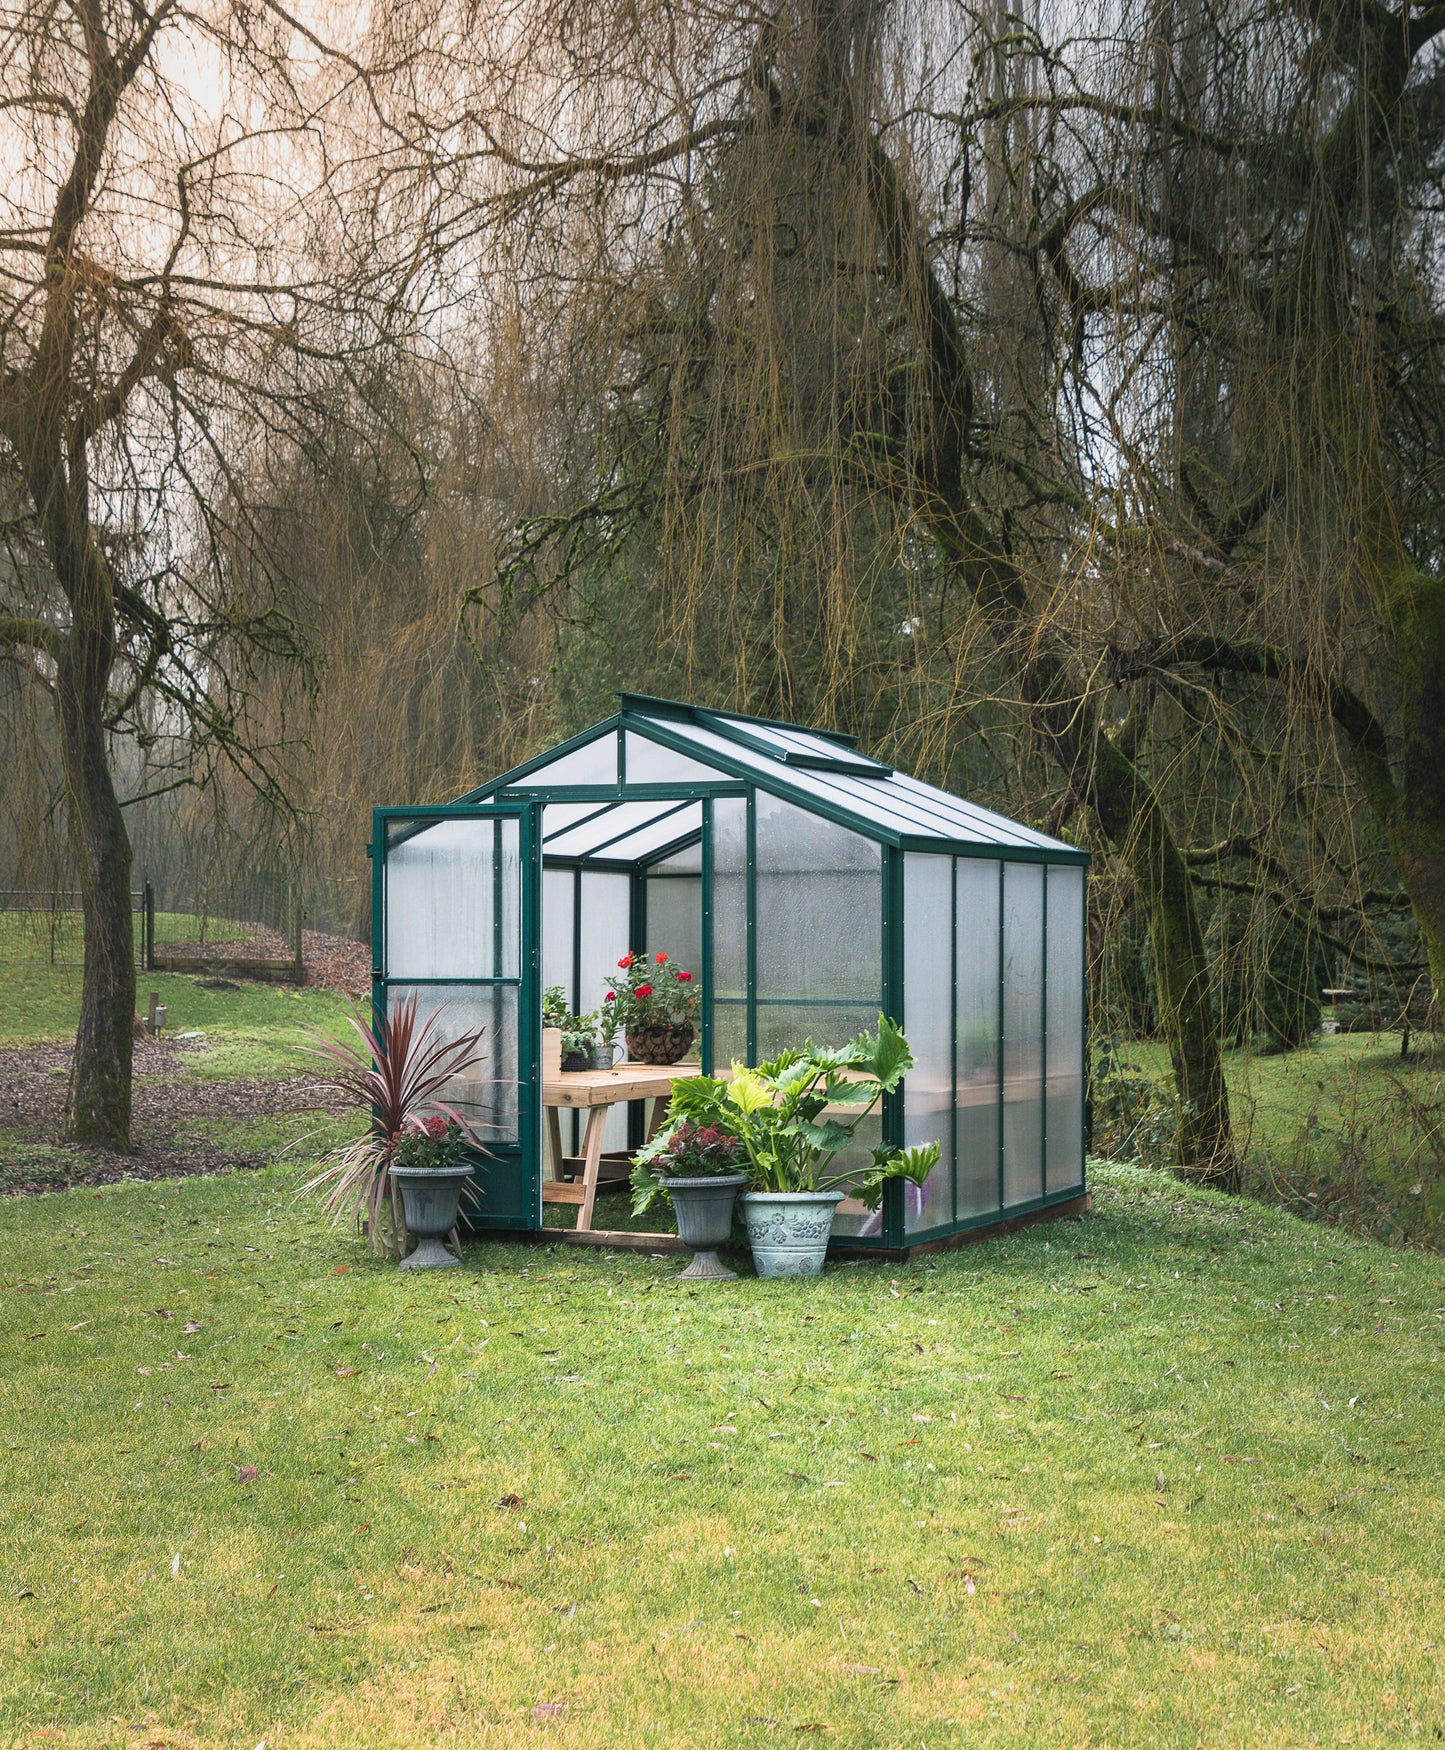 Cross Country Sunhaven 8X8 Polycarbonate Greenhouse